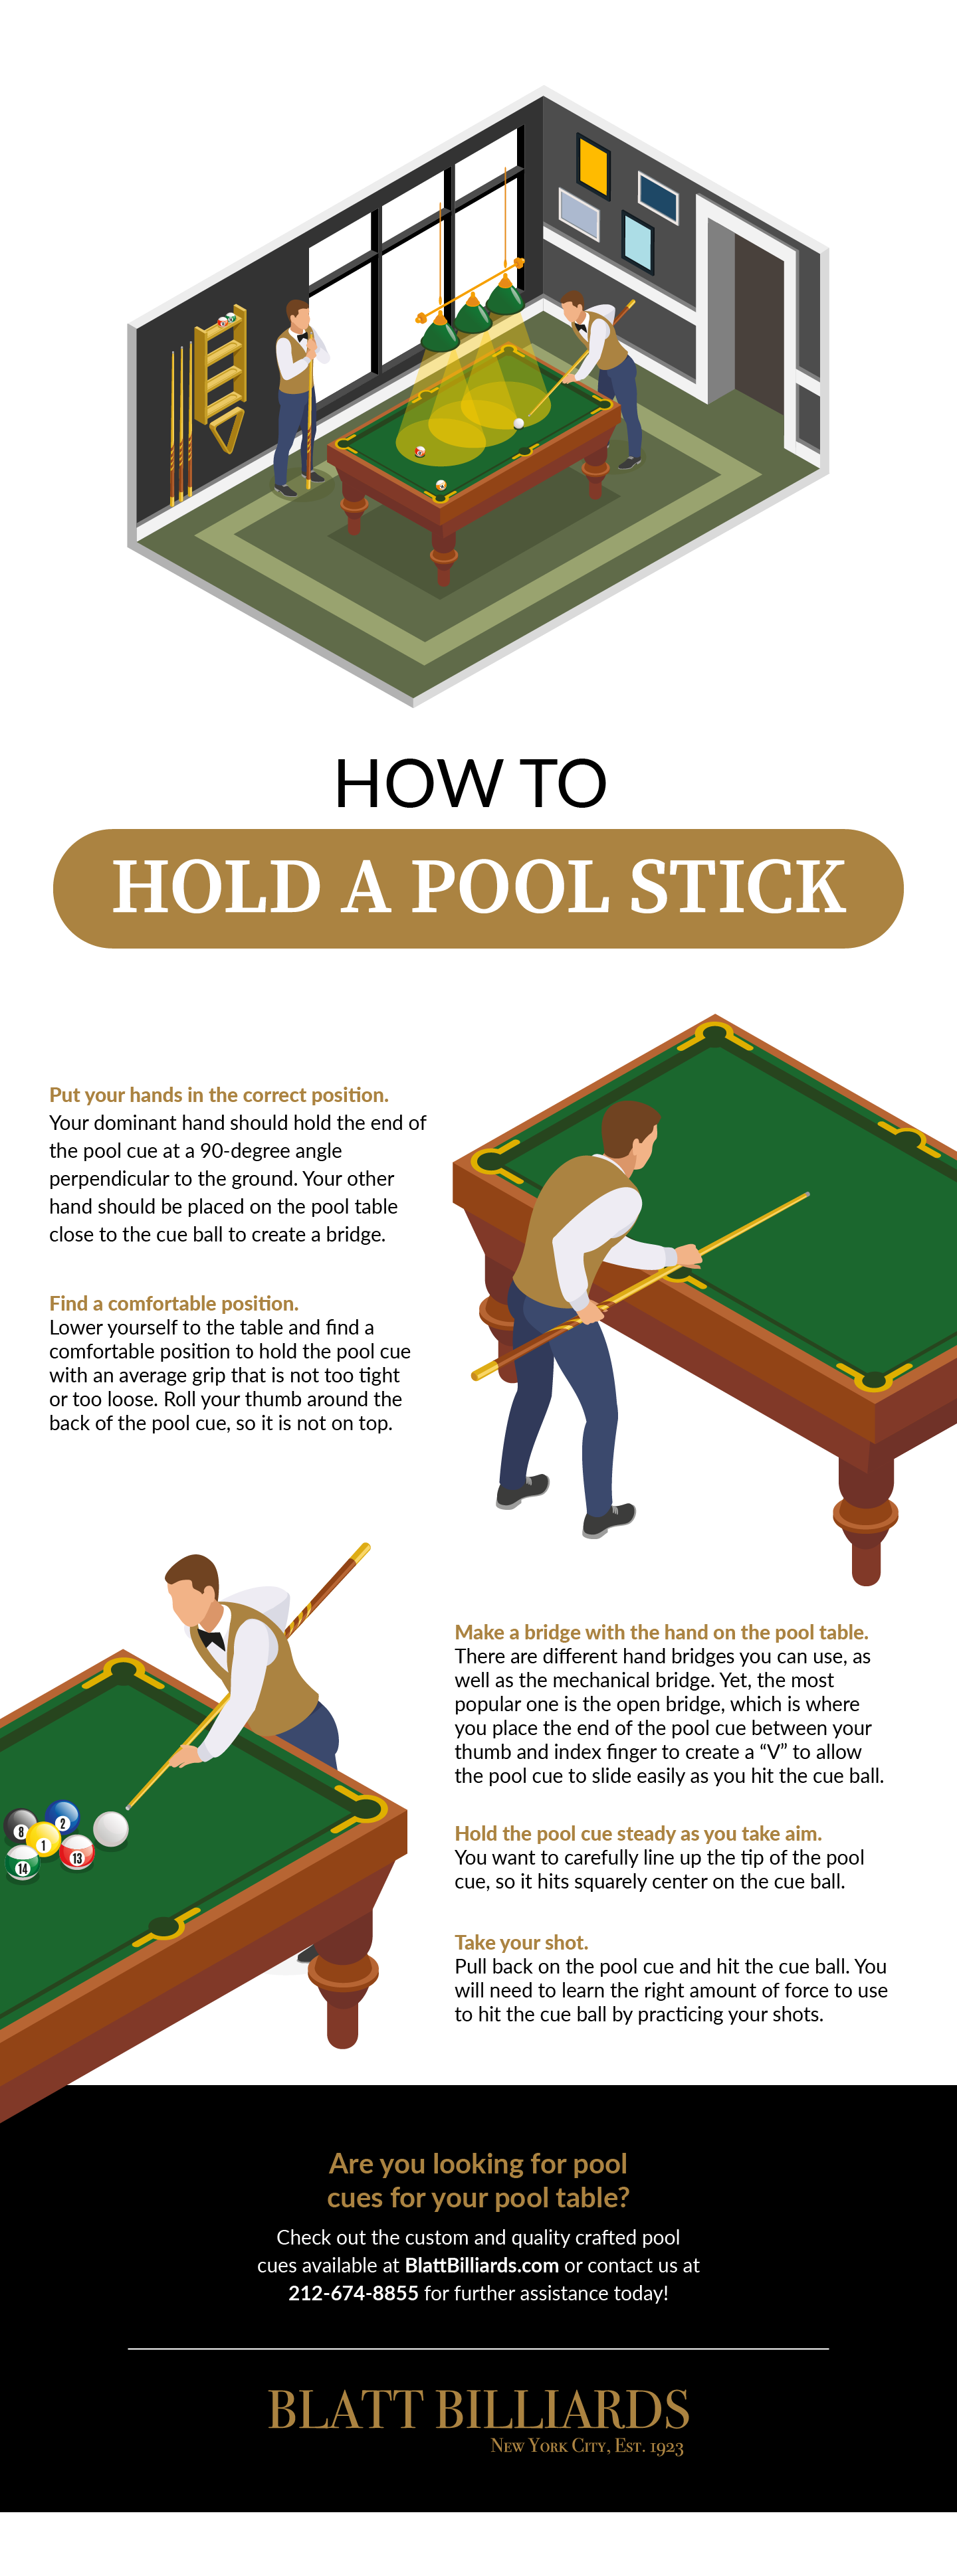 How to Install Pool Cue Tips: 14 Steps (with Pictures) - wikiHow